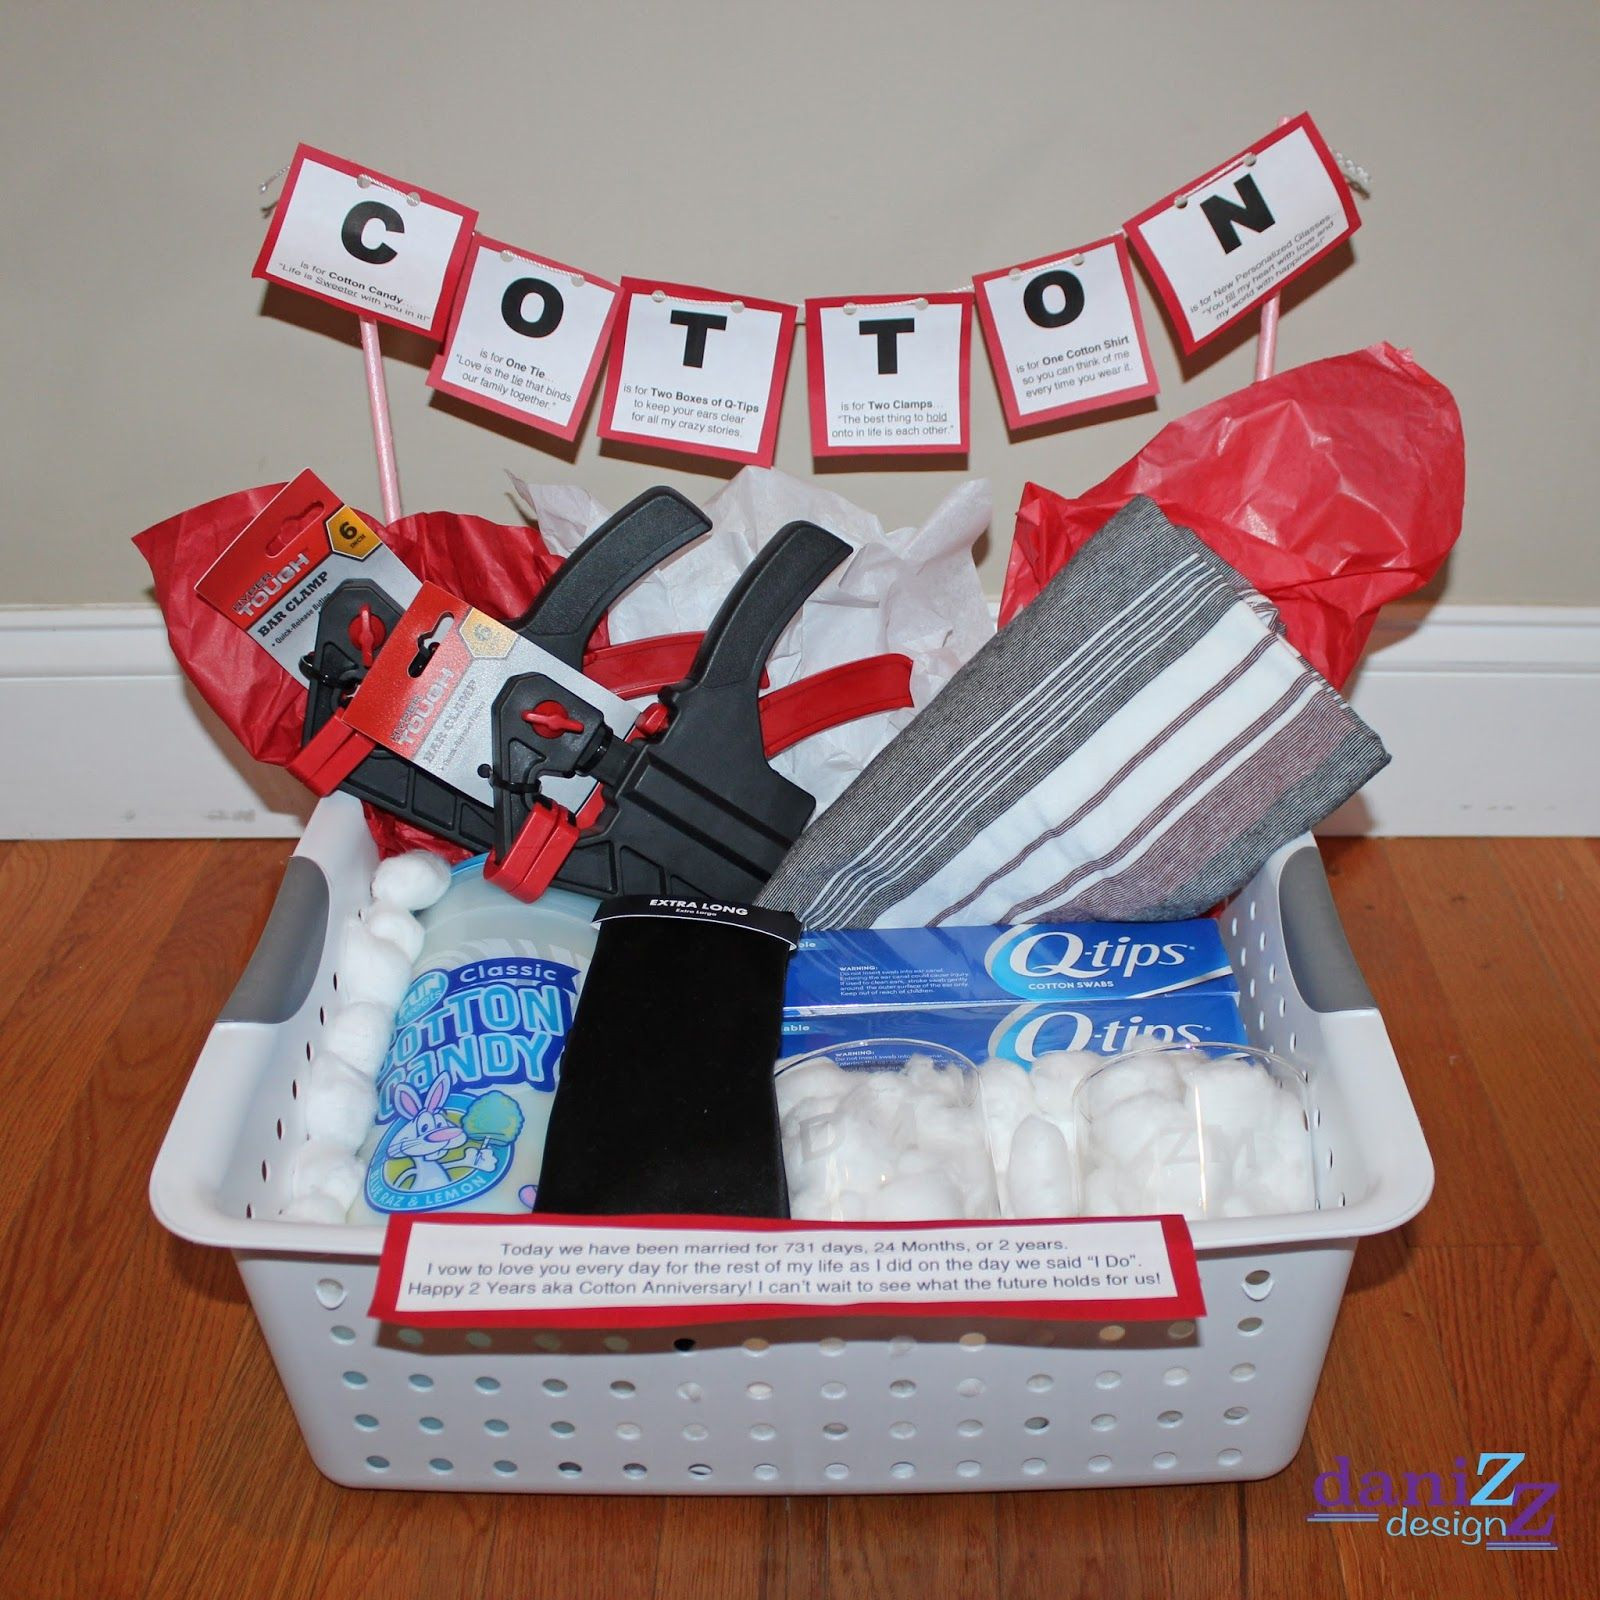 2Nd Wedding Anniversary Gift Ideas For Him
 Cotton Anniversary Gift Basket plus several more t